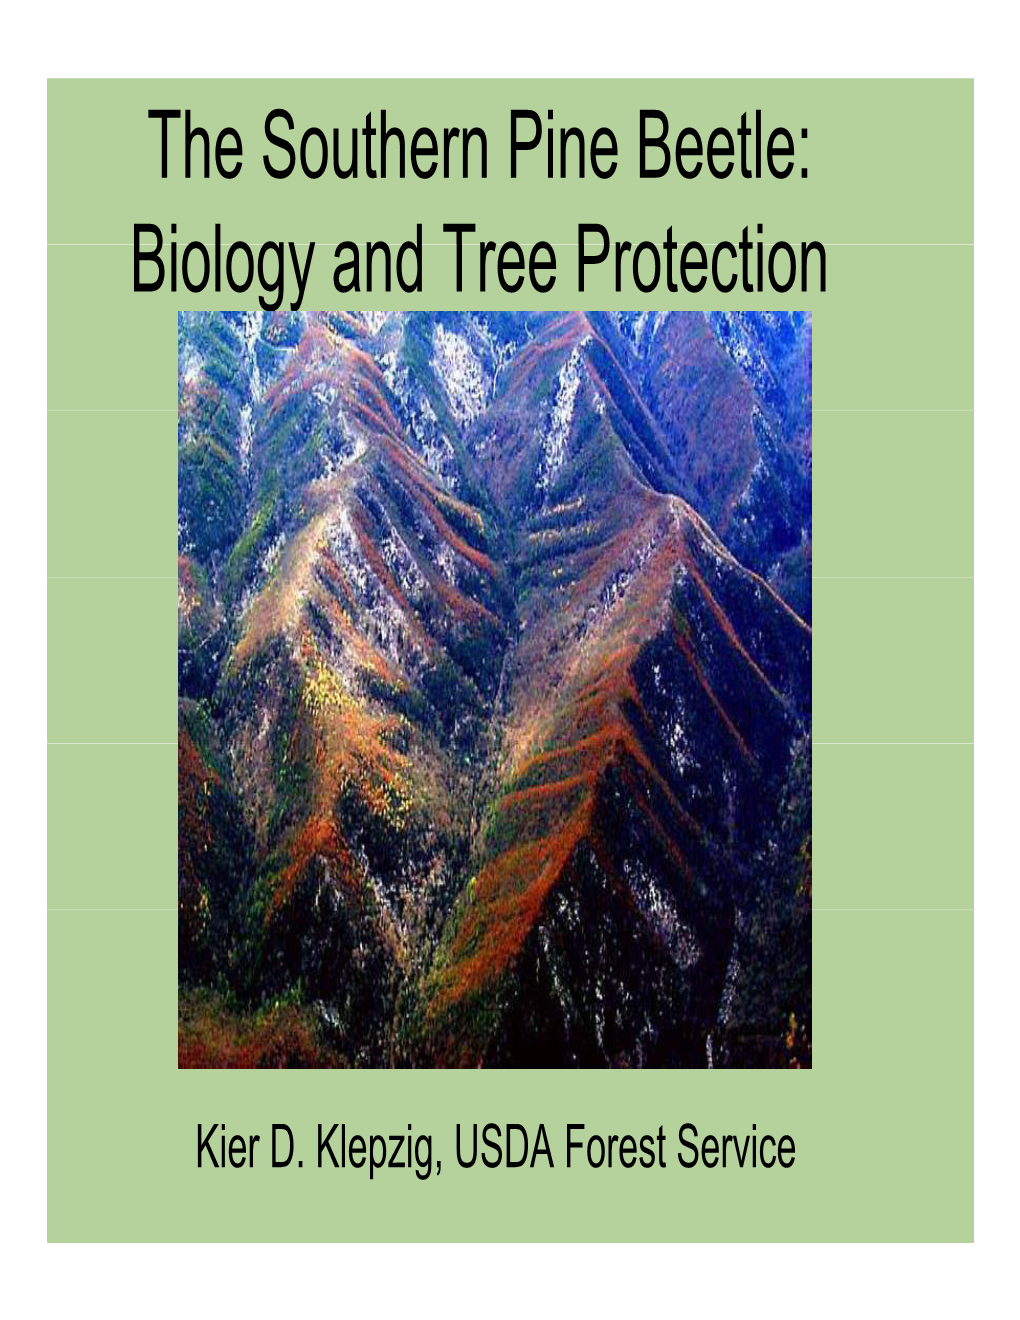 The Southern Pine Beetle: Biology and Tree Protection